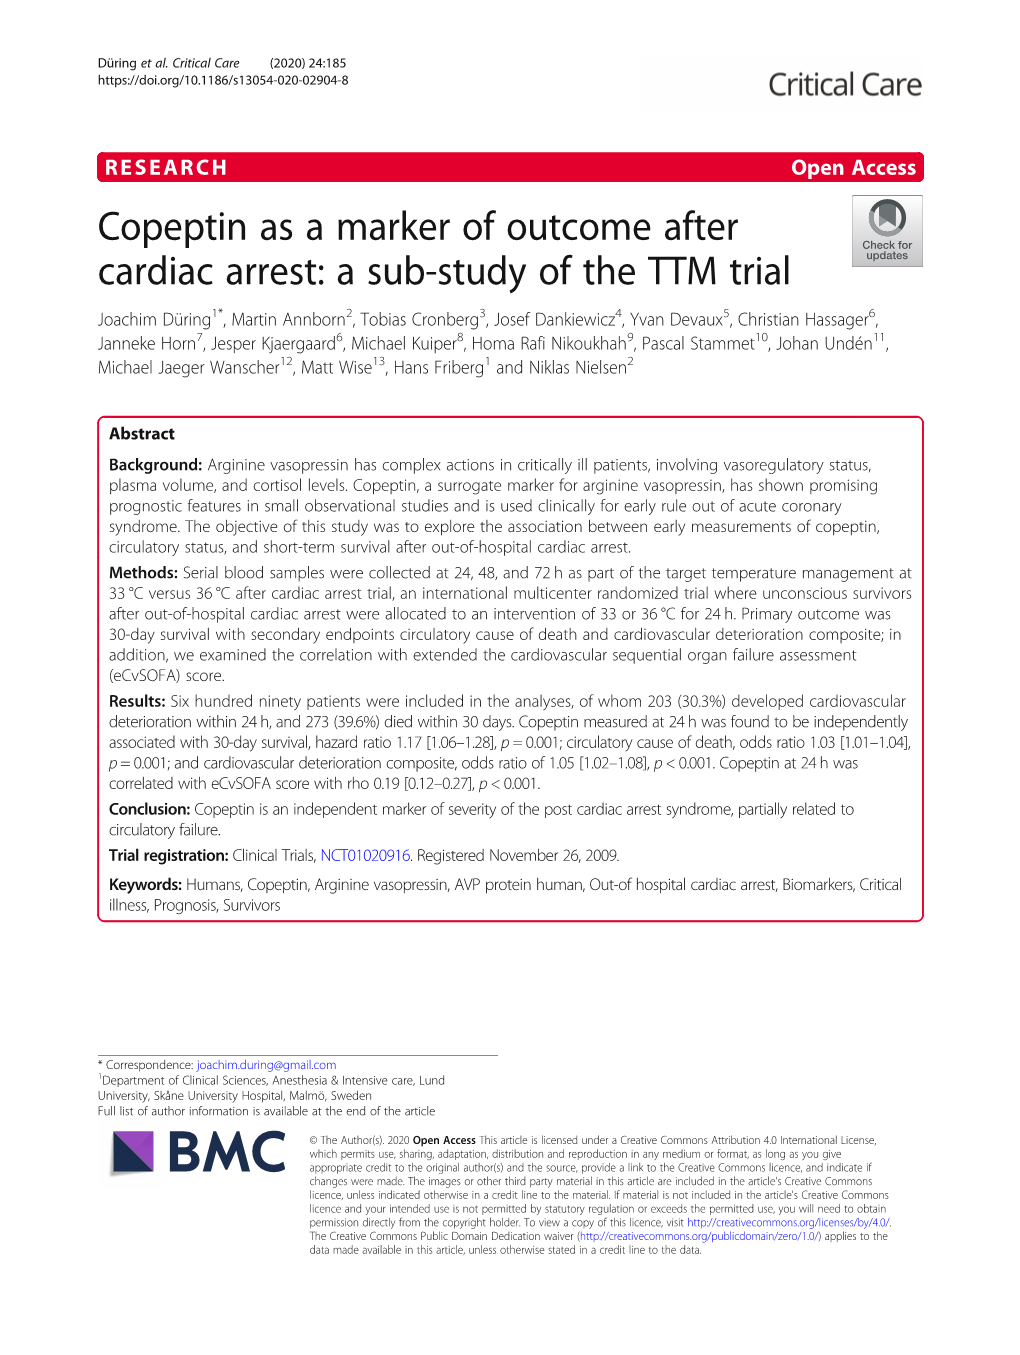 Copeptin As a Marker of Outcome After Cardiac Arrest